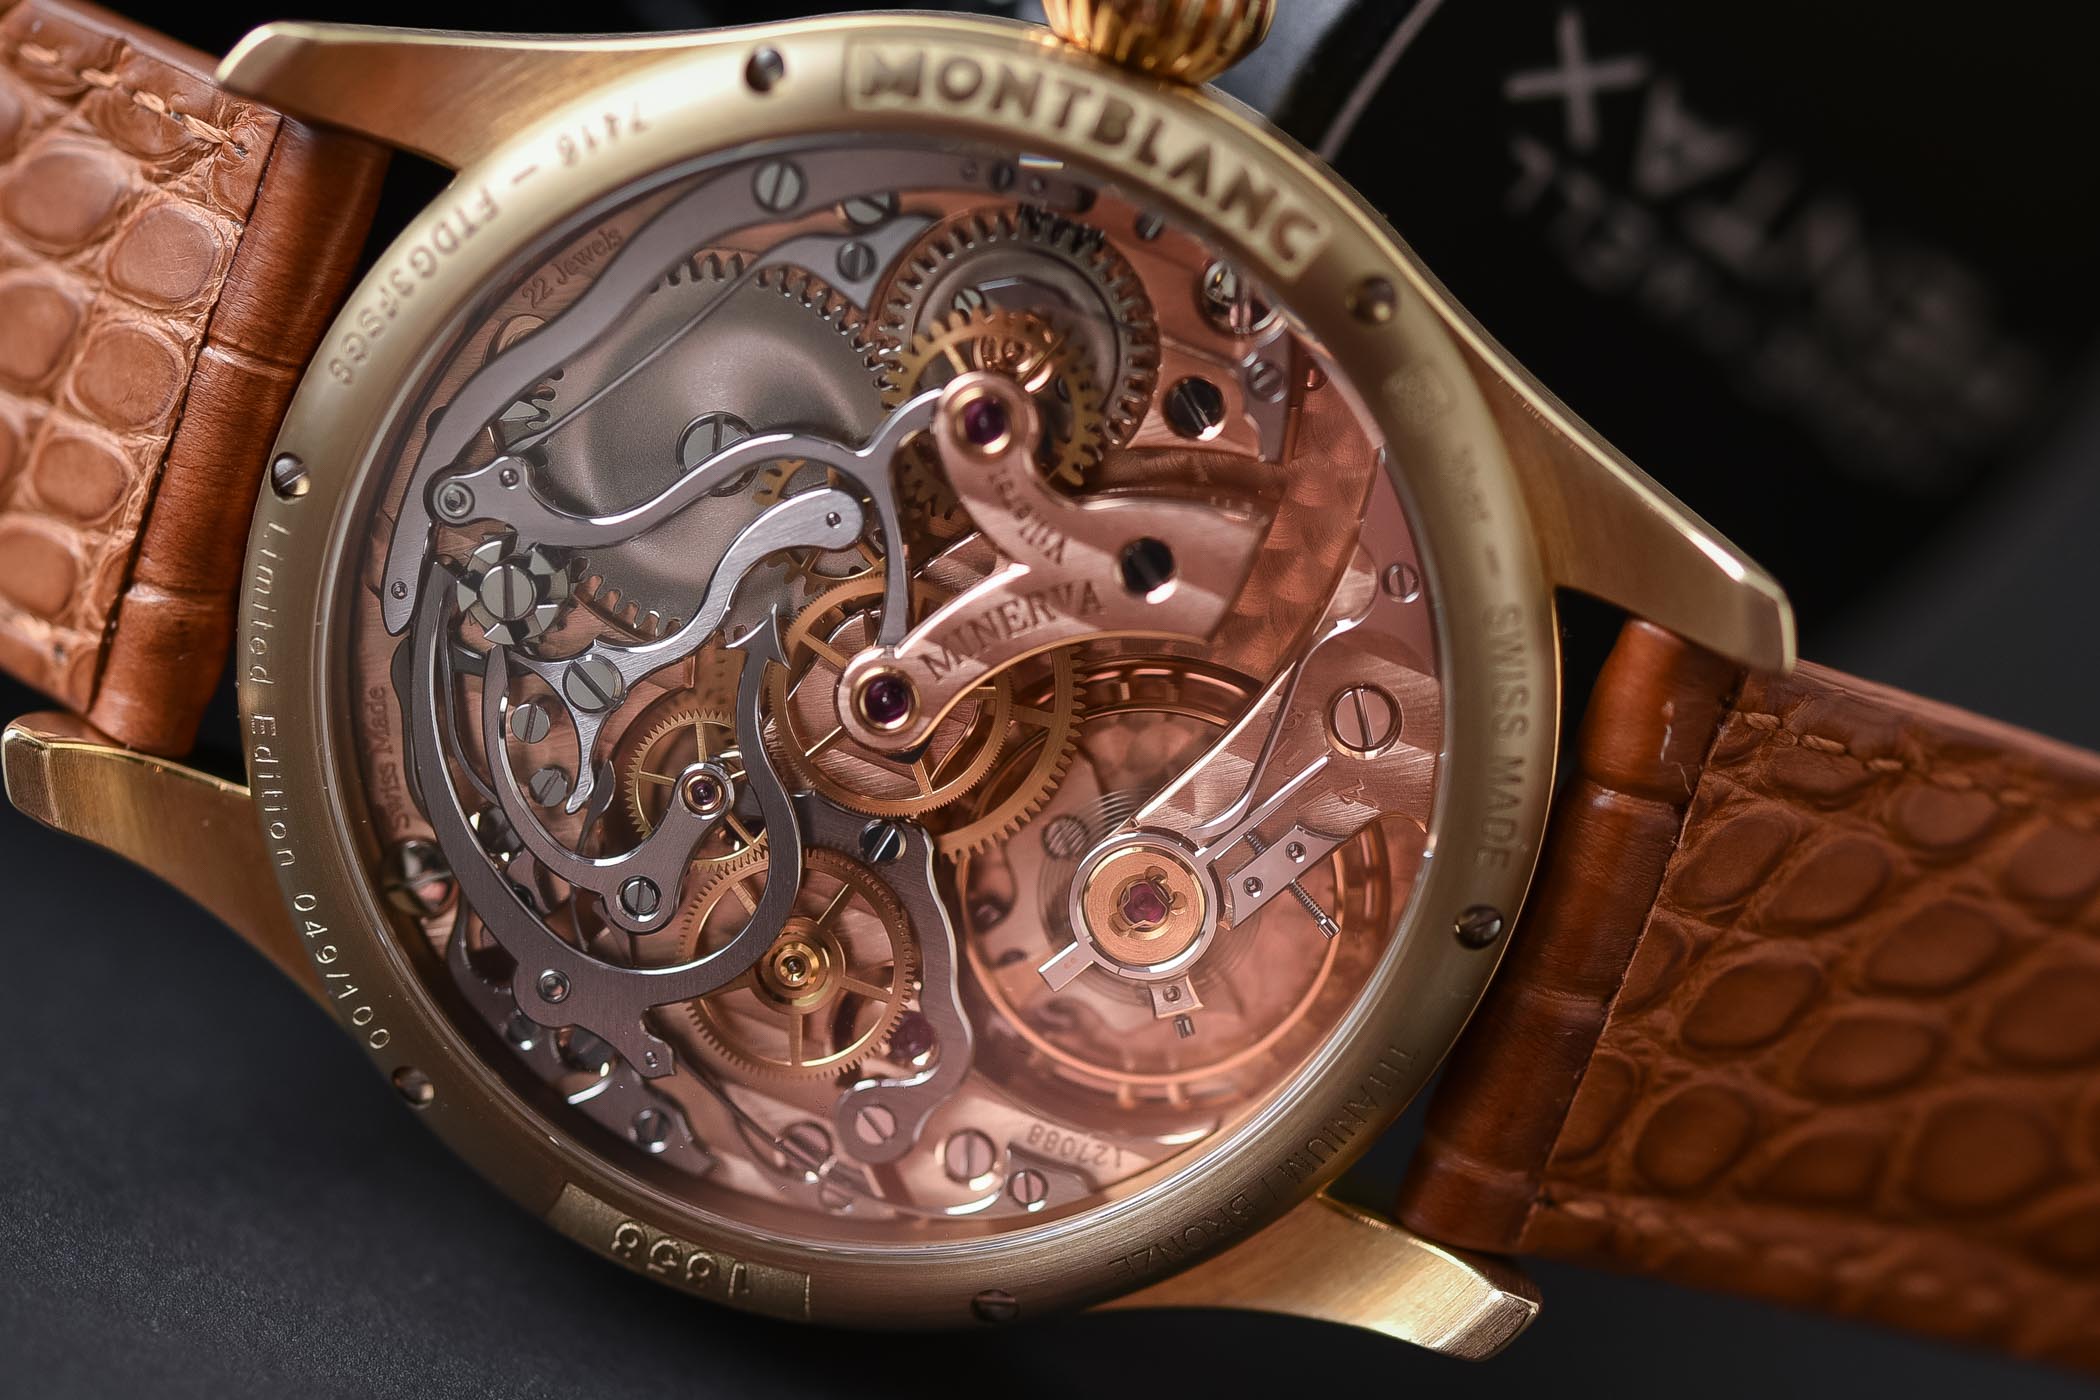 Montblanc 1858 Chronograph Tachymeter Limited Edition Bronze Salmon Dial